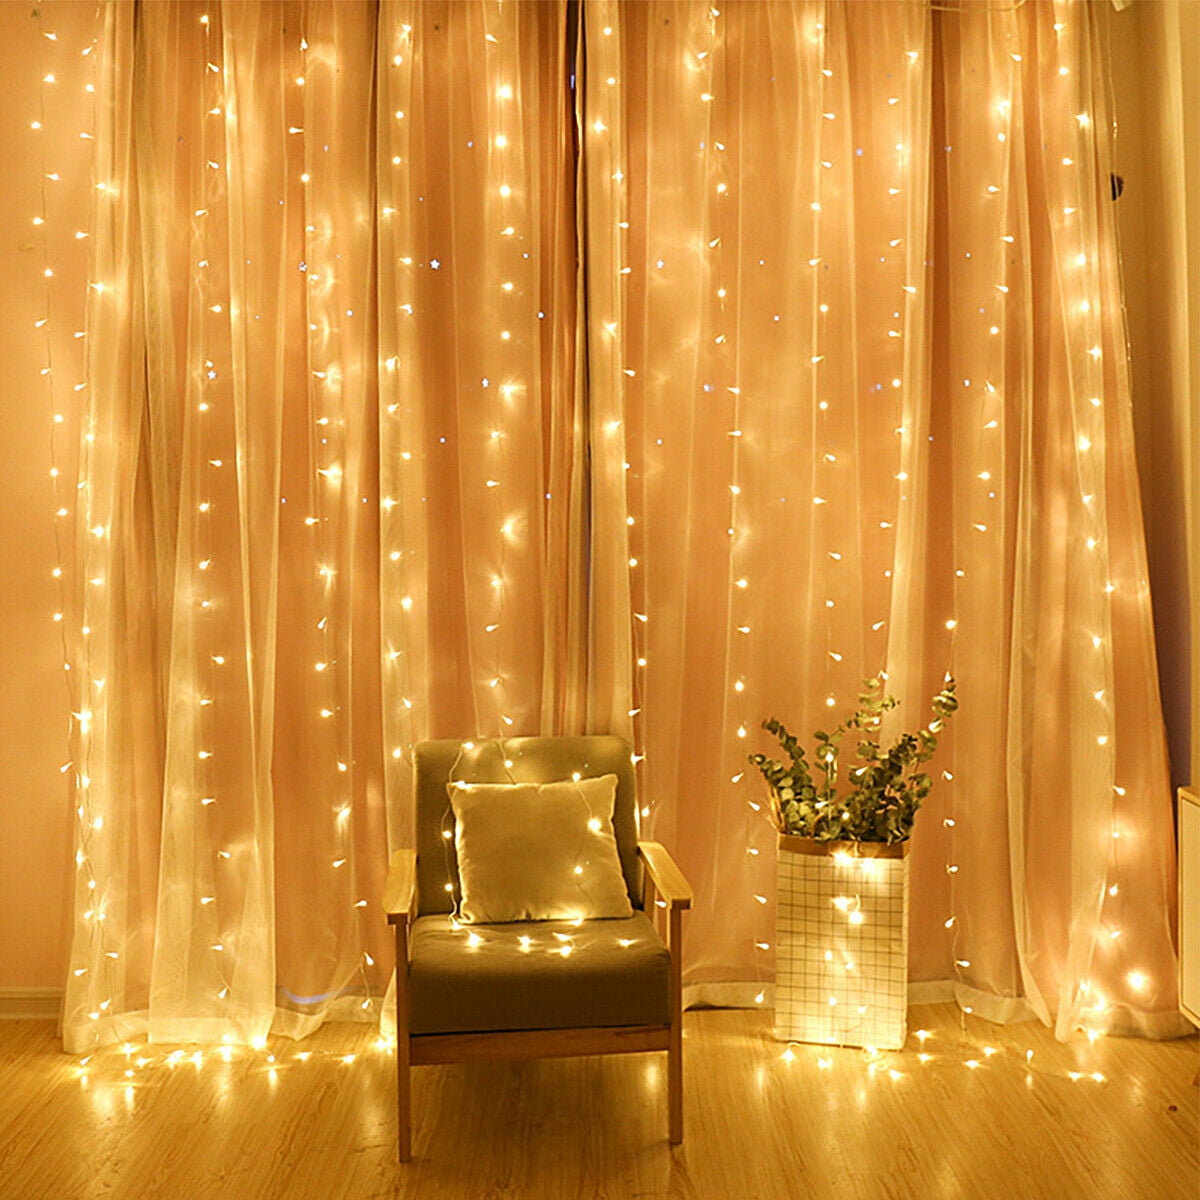 Details about   300LED/10ft Curtain Fairy Hanging String Lights Wedding Party Wall Decor Lamp US 